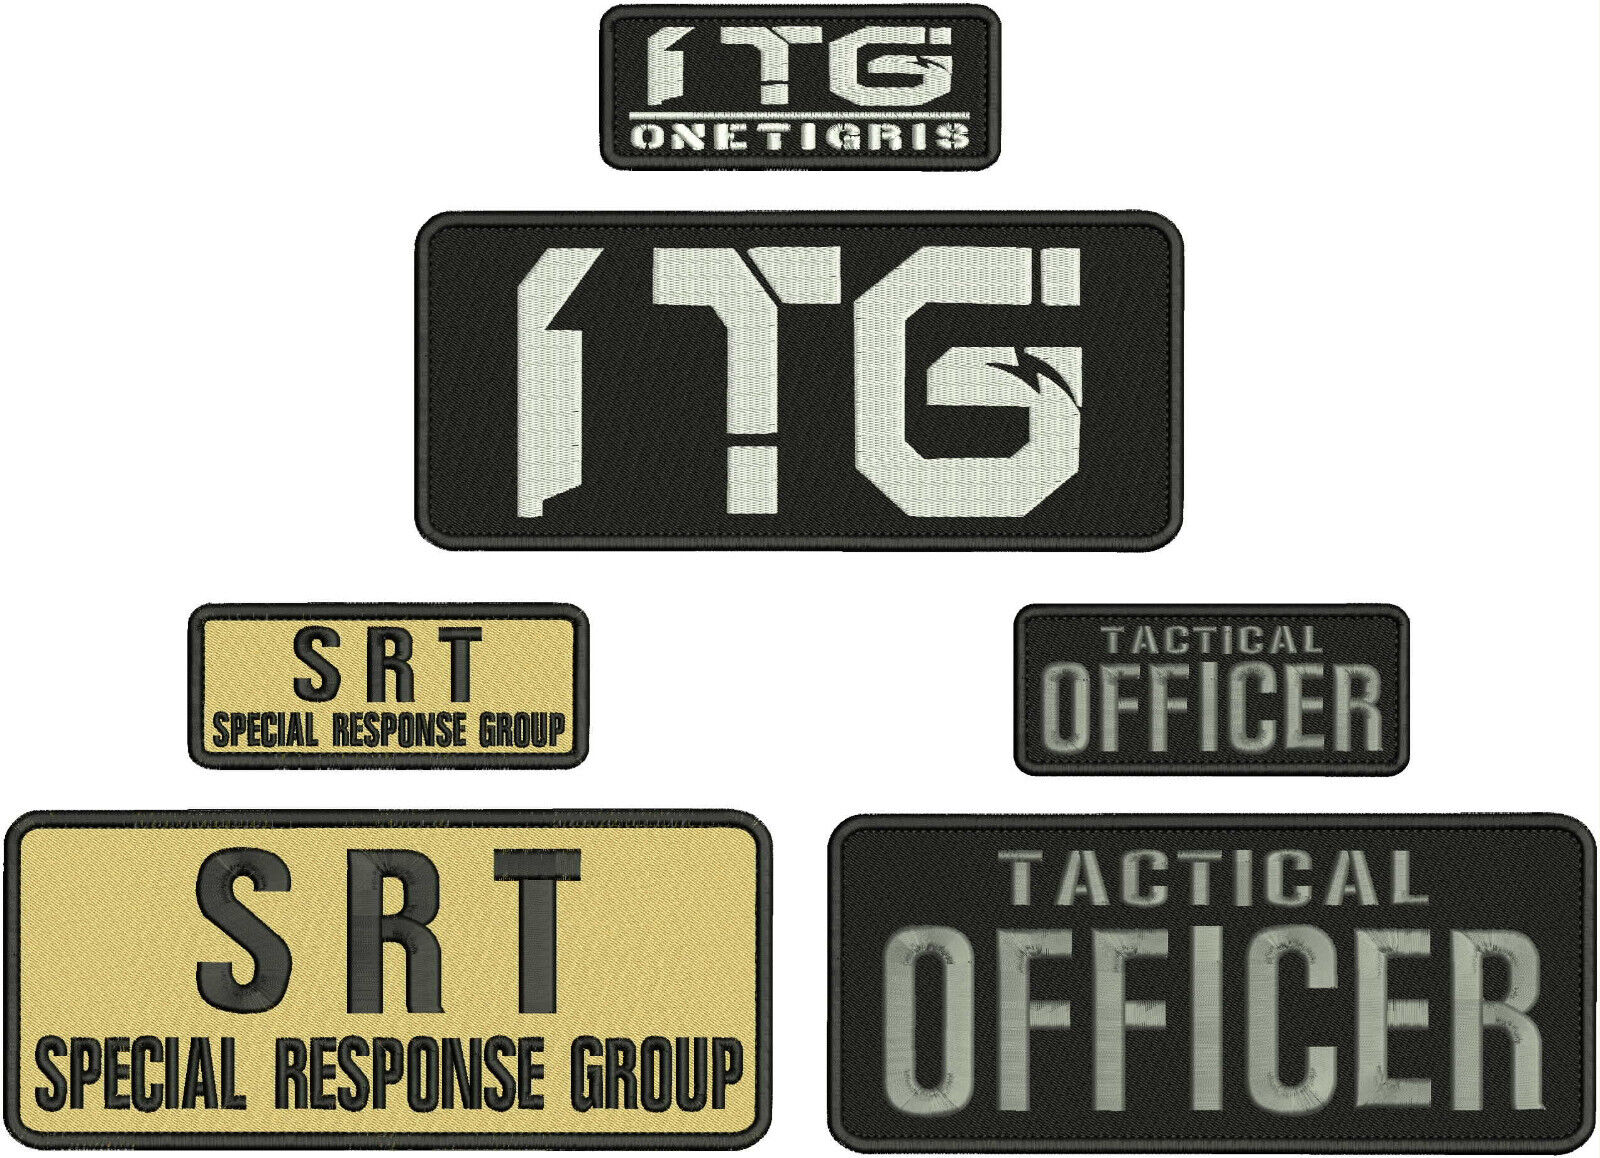 TACTICAL OFFICER3 set  EMBROIDERY PATCH 4X10 AND 2X5 HOOK ON BACK GRAY BLACK